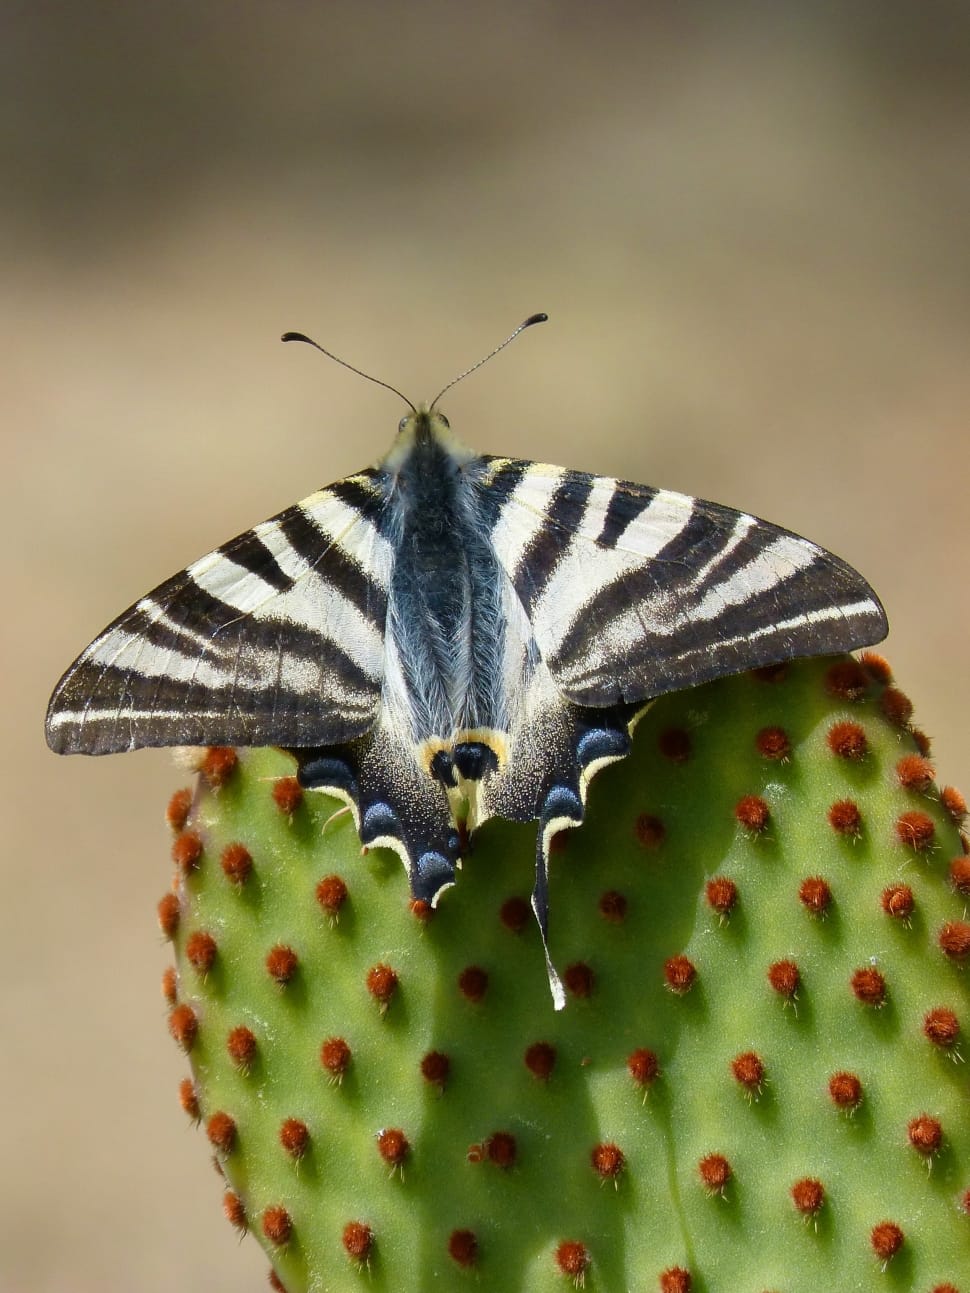 black and white banded  moth on green and red cactus in shallow focus lens preview